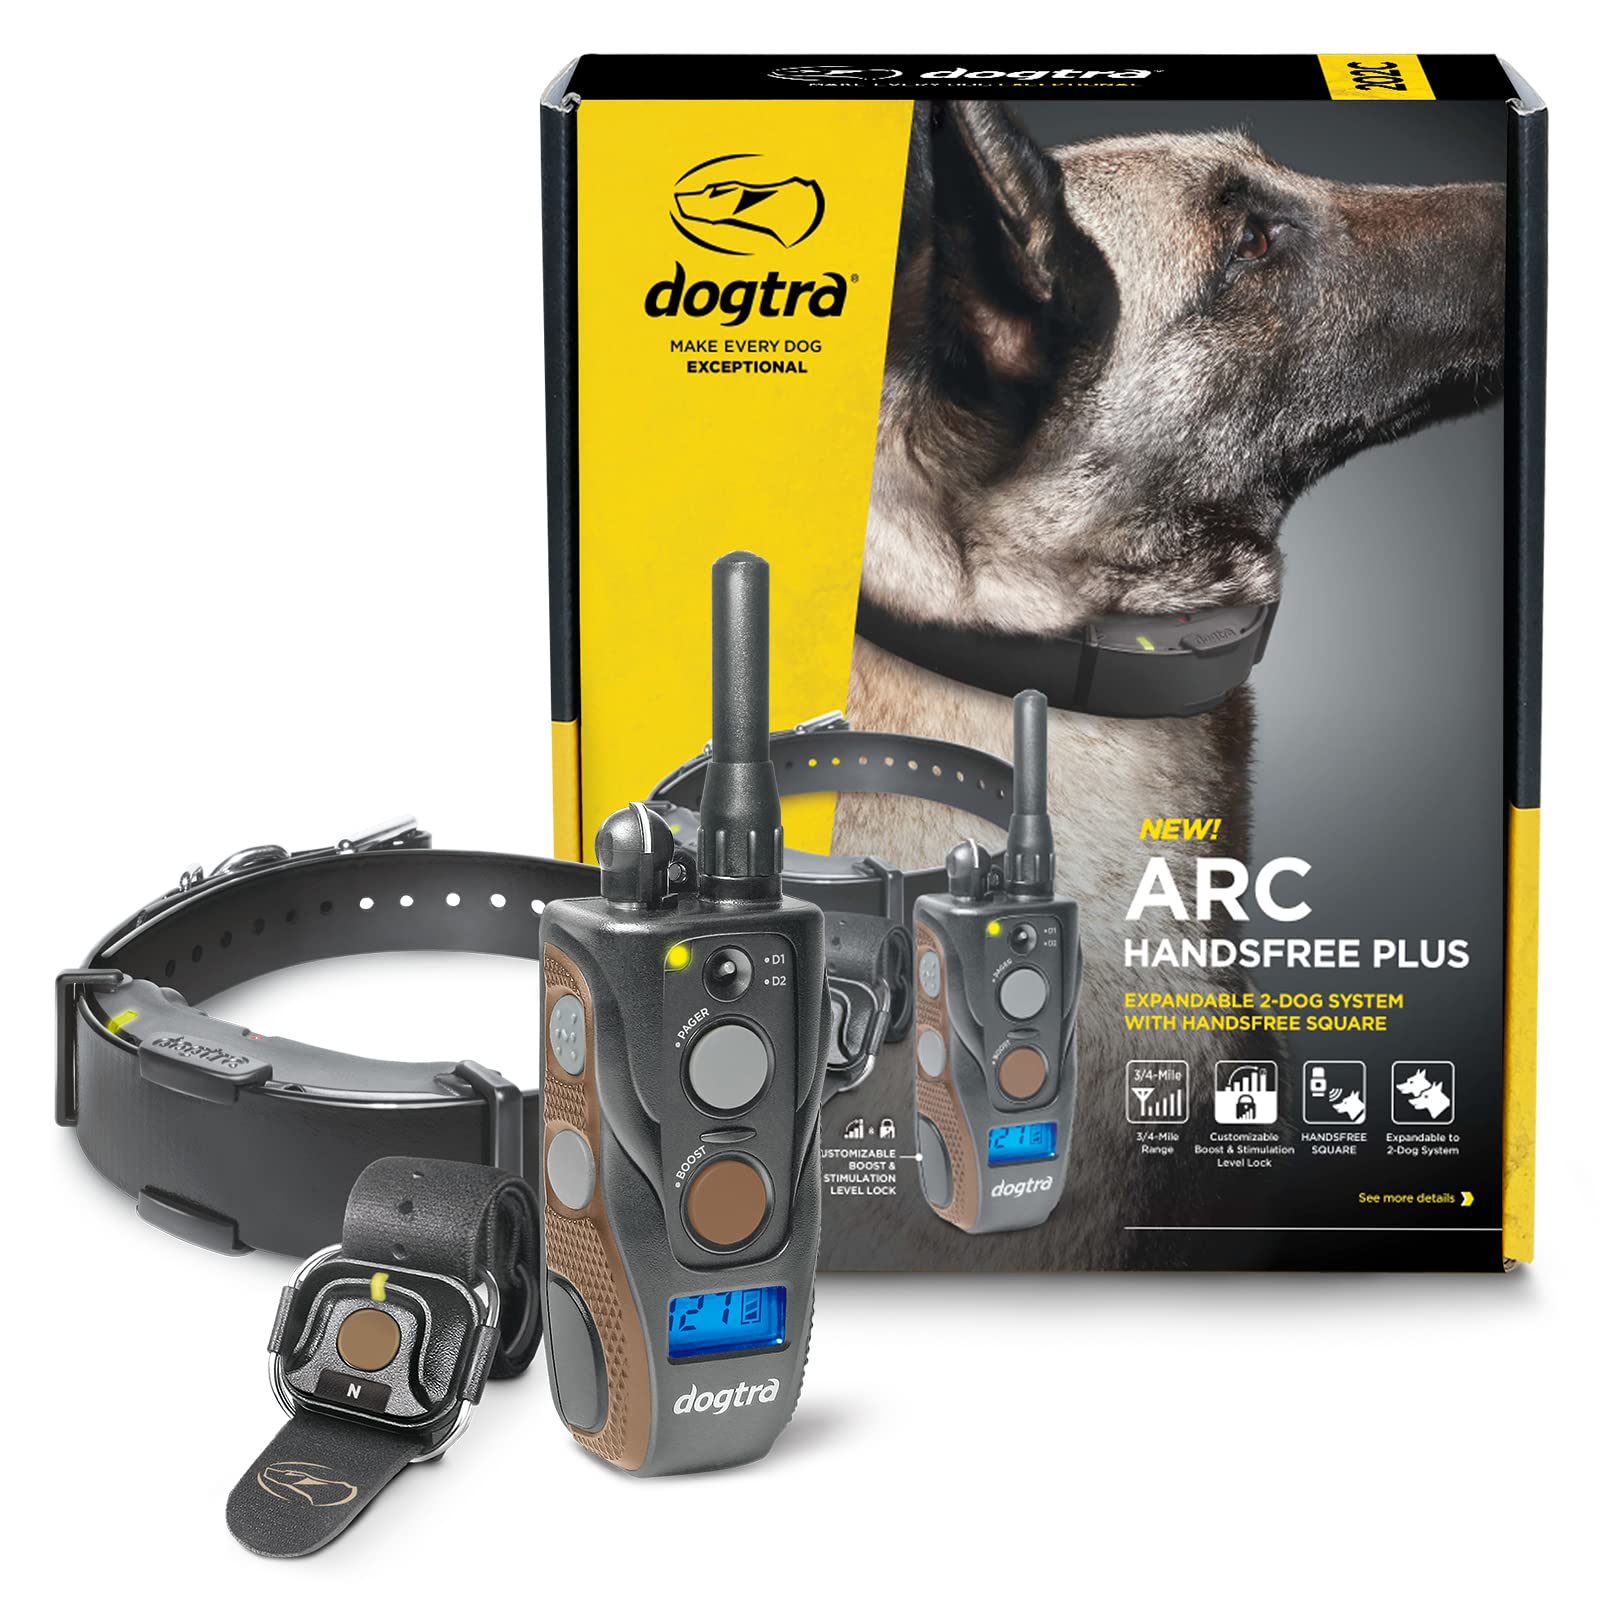 Dogtra - ARC HANDSFREE Plus Boost and Lock, Remote Dog Training E-Collar, 3/4-Mile Range, Large Dogs